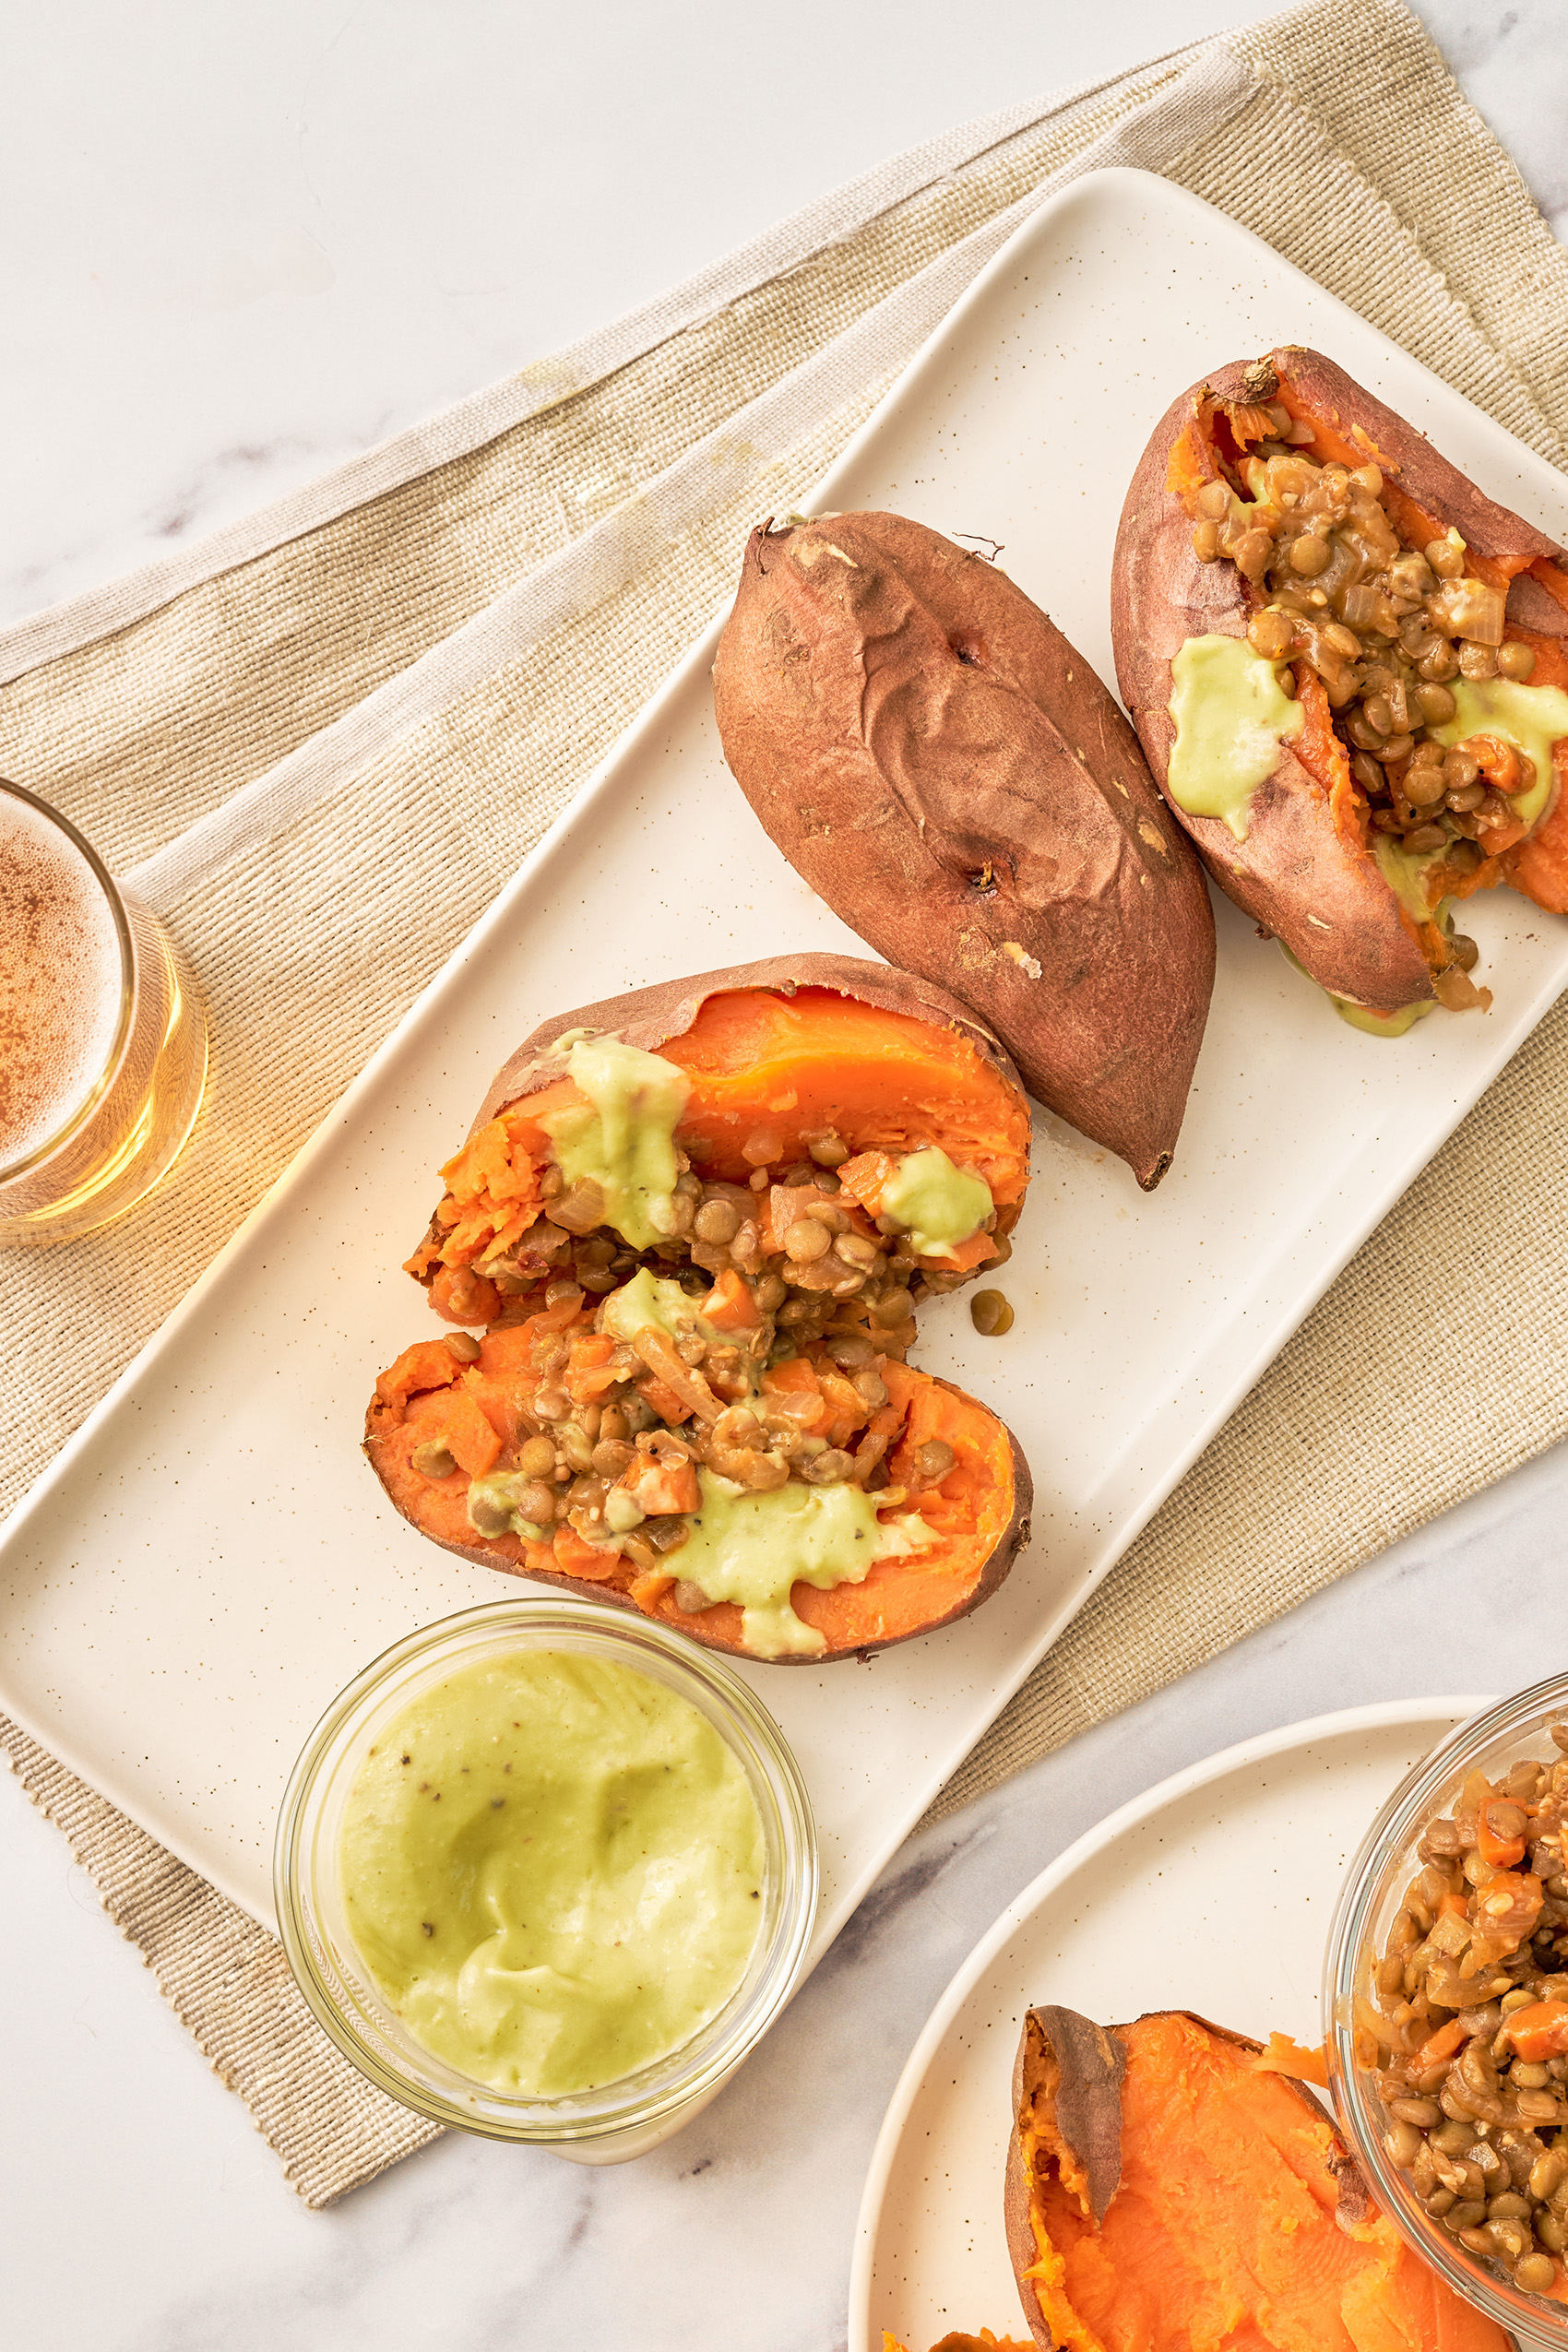 three sweet potatoes, one whole and two sliced in half and stuffed with lentils and avocado sauce